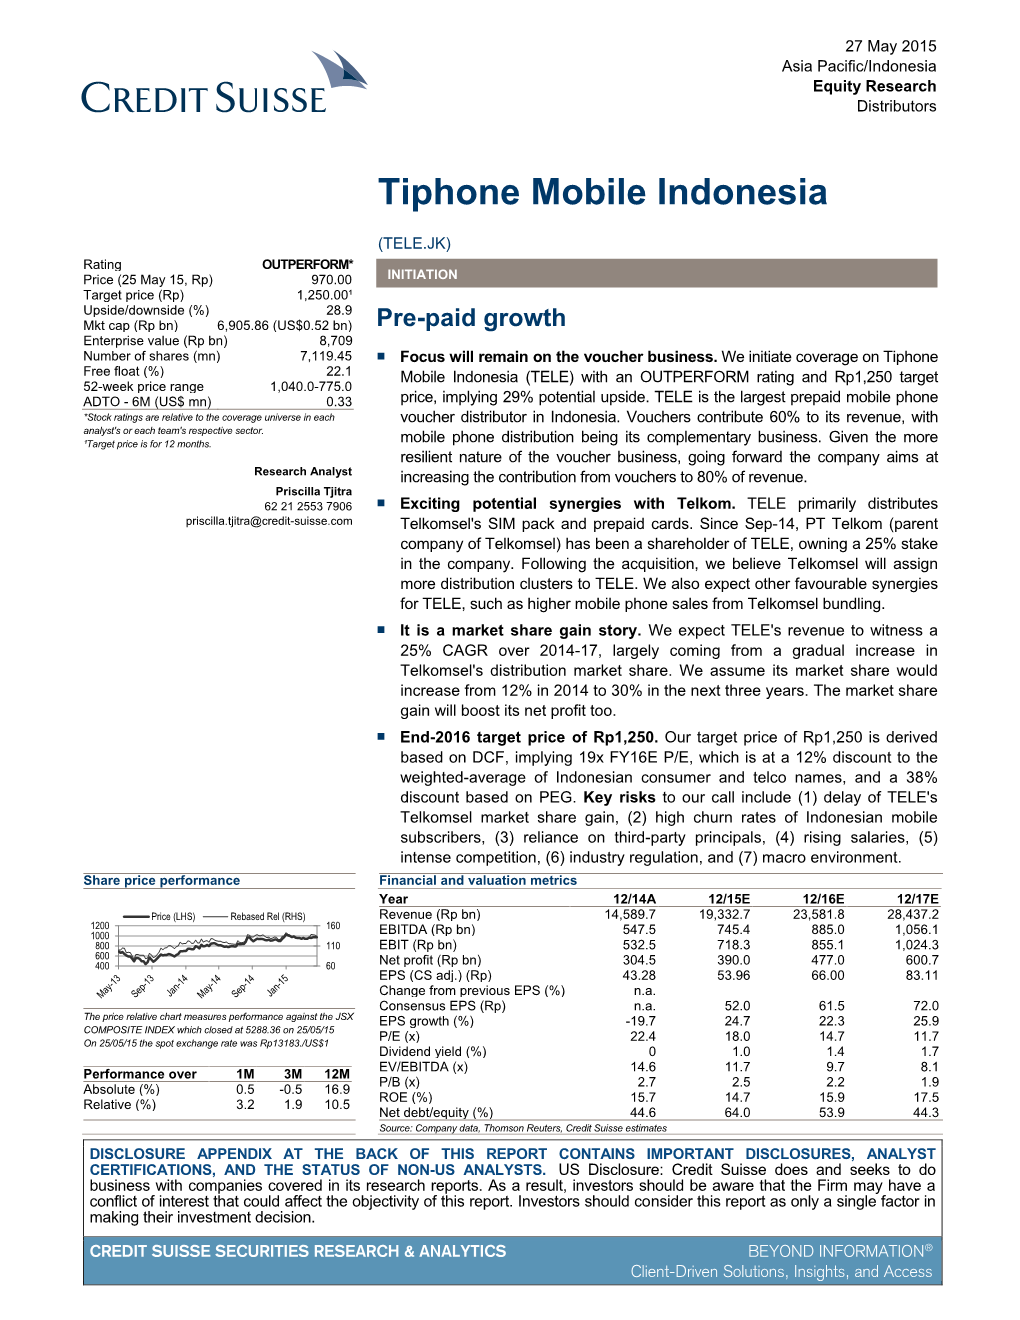 Tiphone Mobile Indonesia